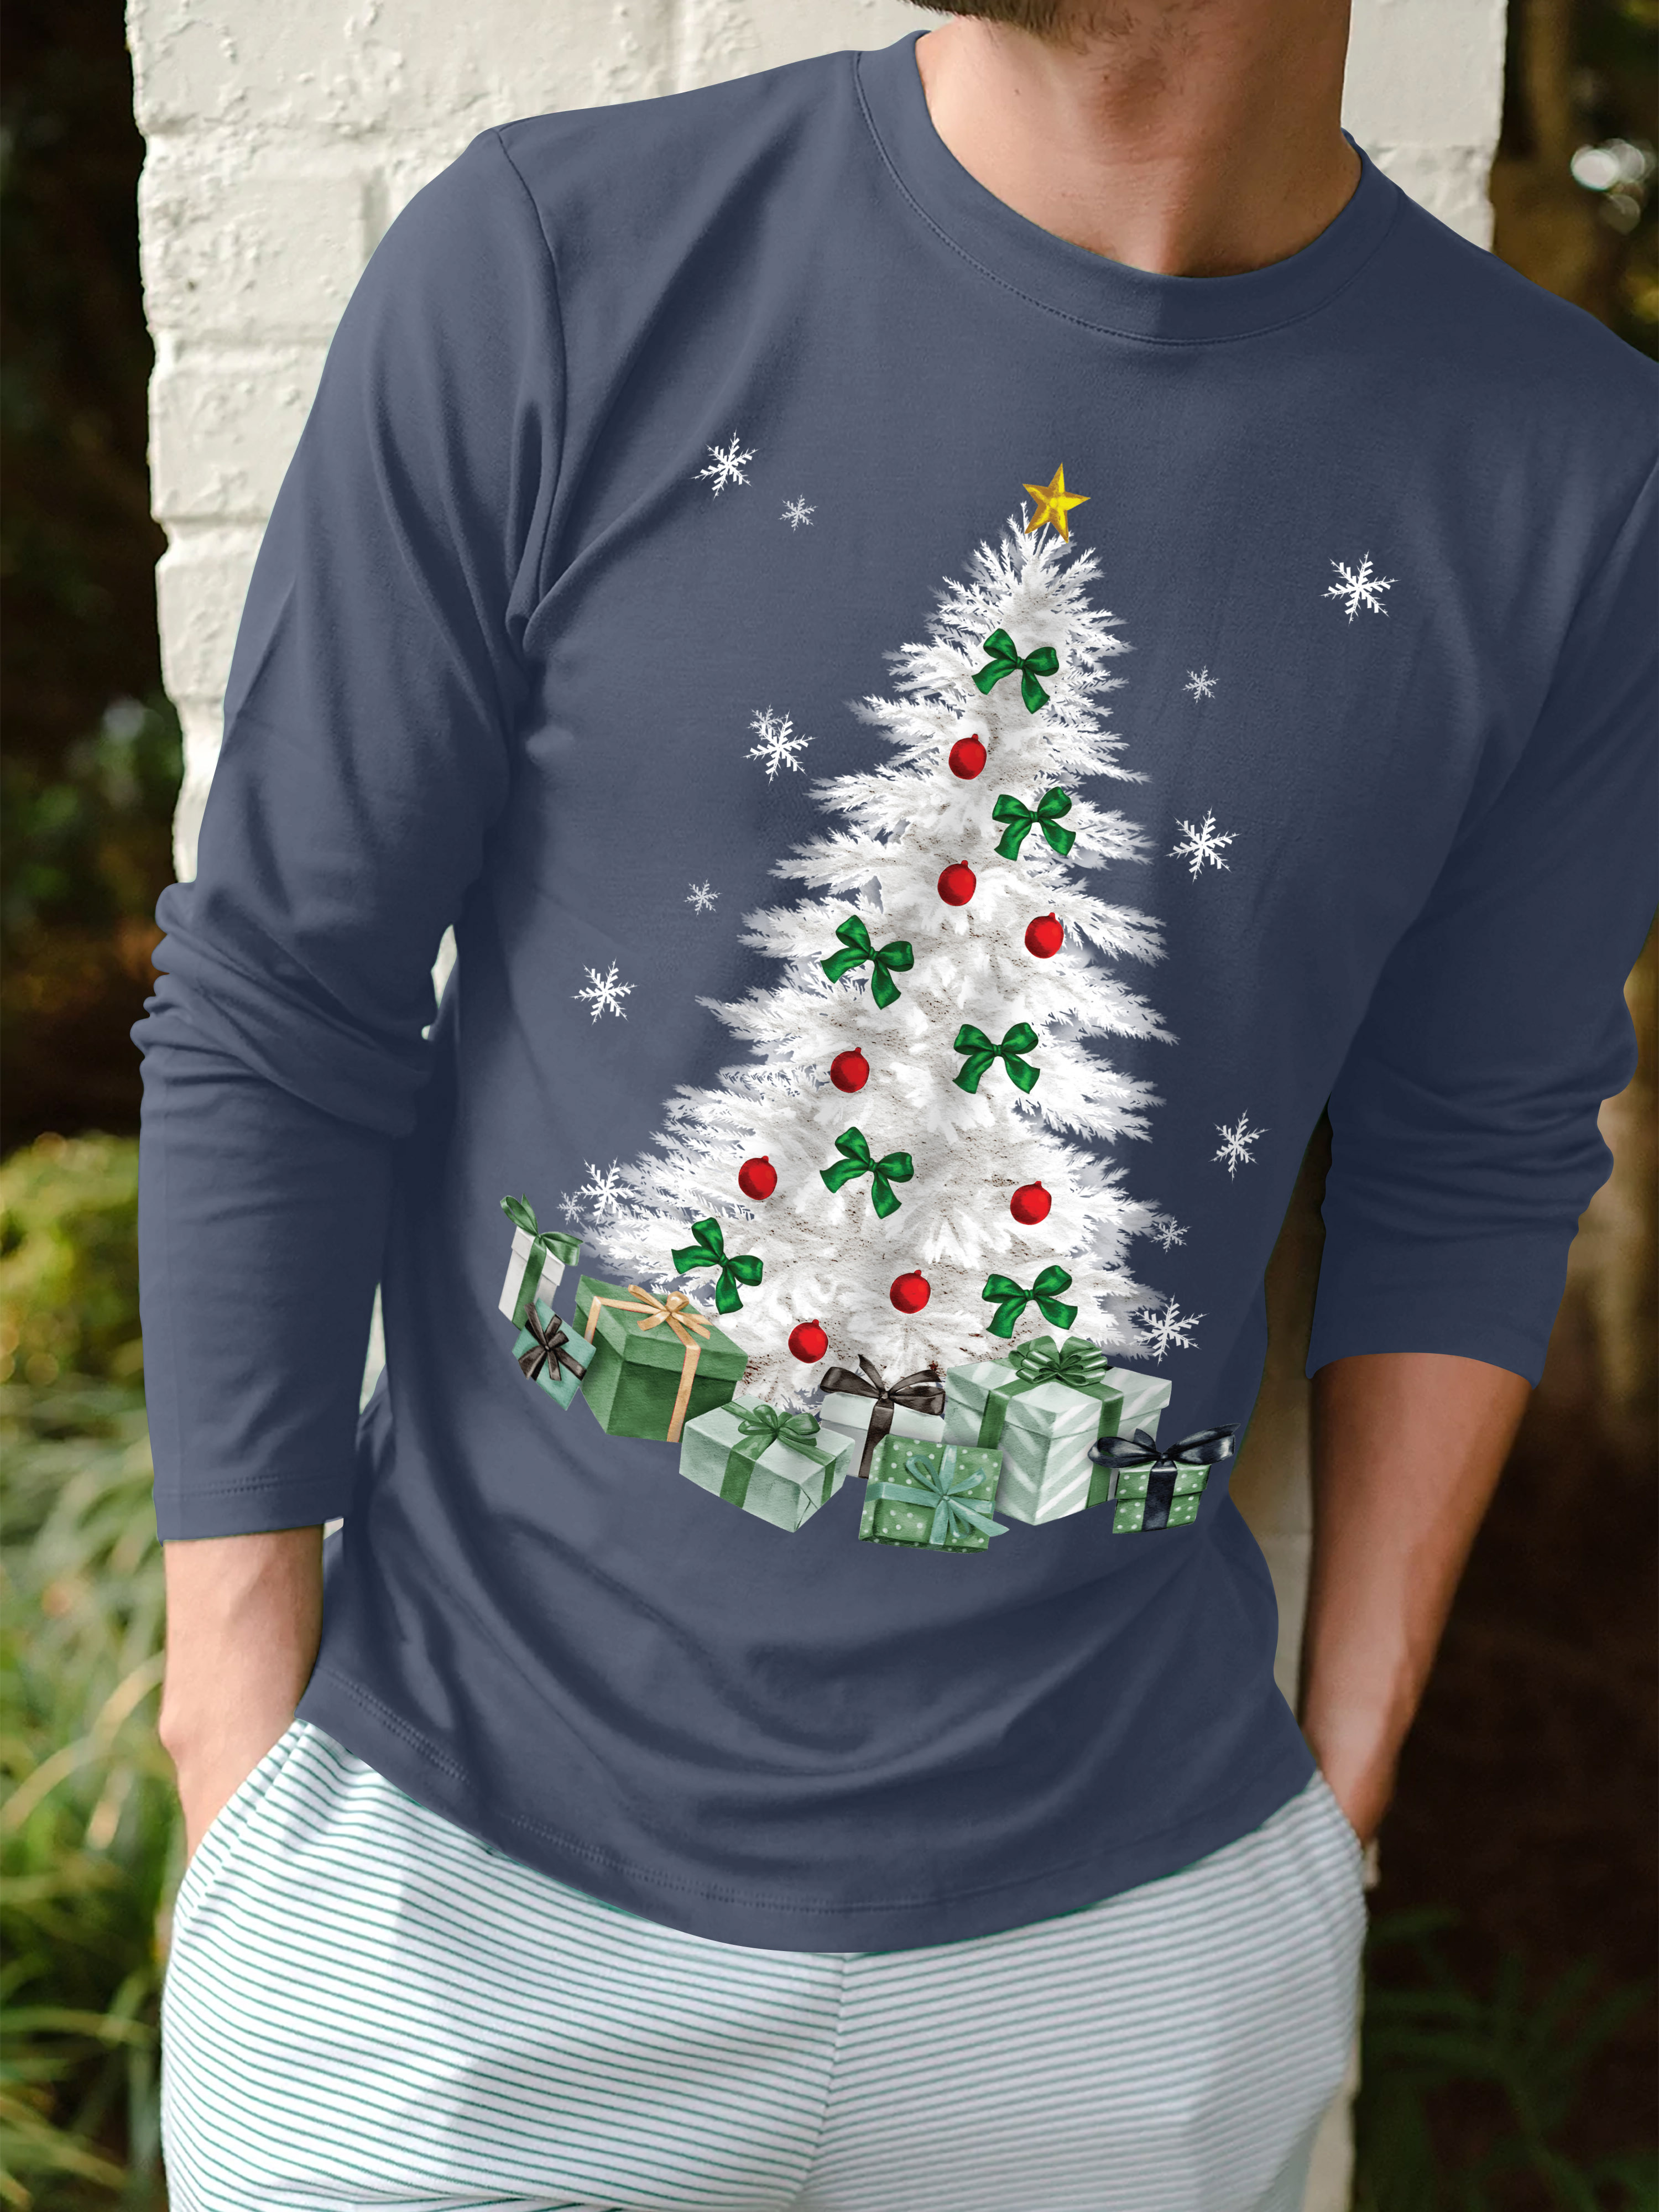 Hat and Beyond Mens Festive Winter Holidays Digitally Print Sparkling Christmas Tree Crew Neck Long Sleeved Tee Shirts